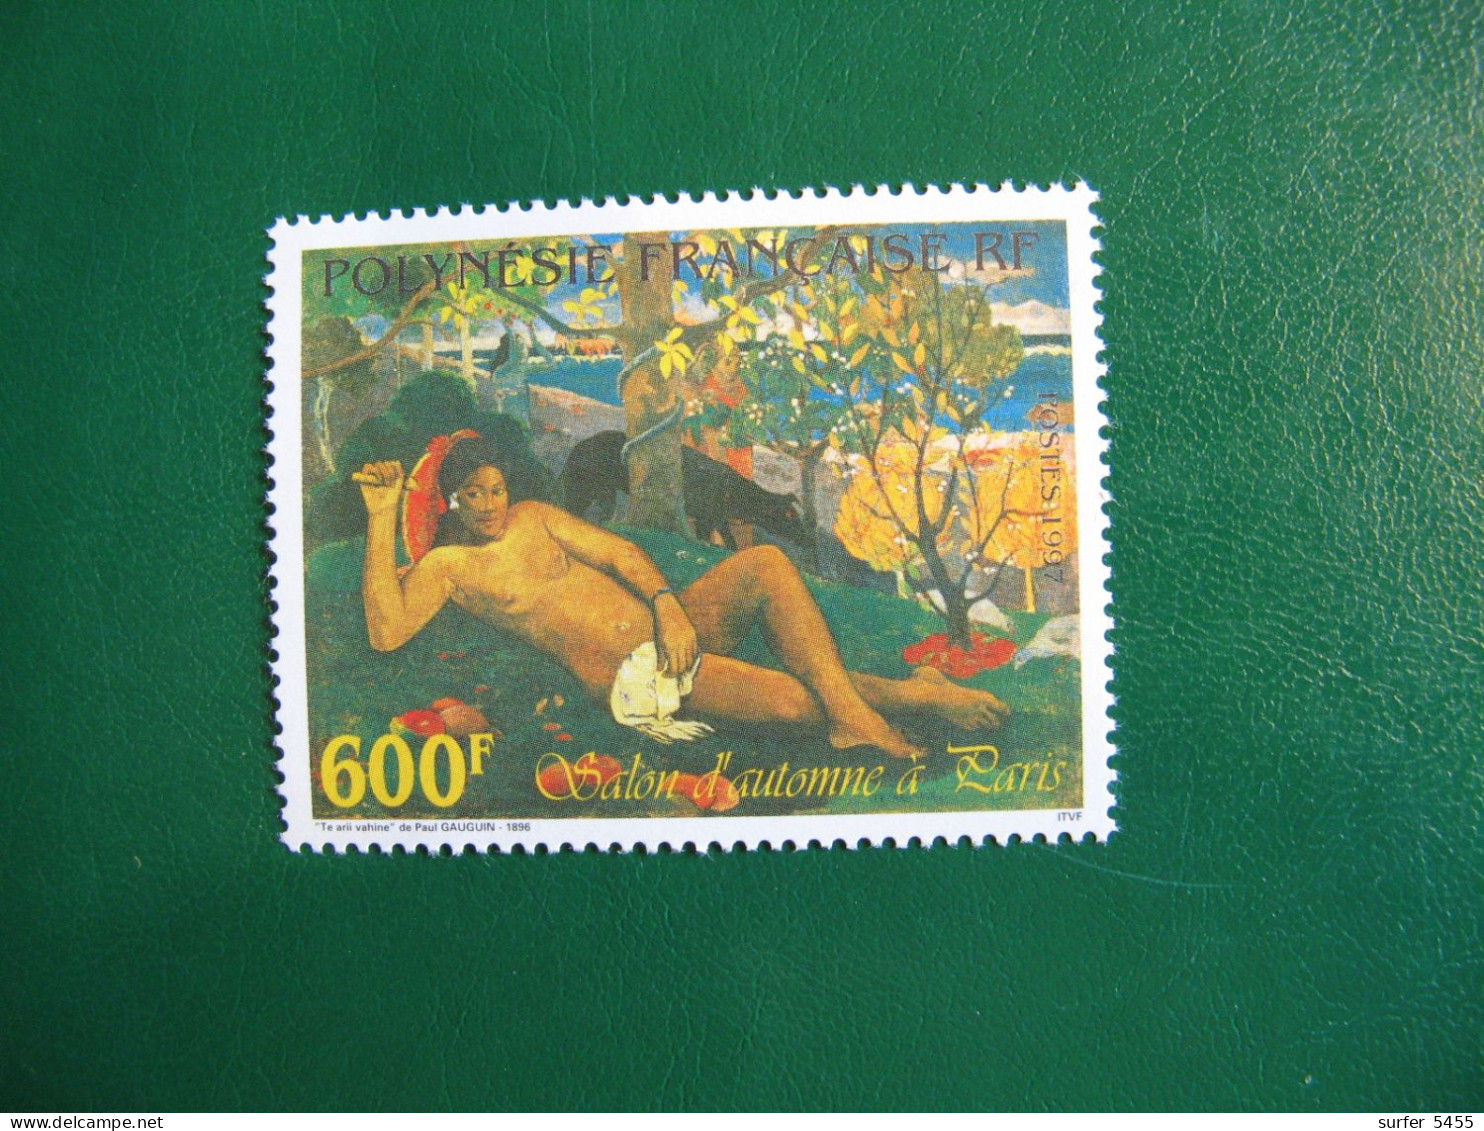 P0LYNESIE PO ORDINAIRE N° 553 TIMBRE NEUF ** LUXE - MNH - SERIE COMPLETE - COTE 18,50 EUROS - Ungebraucht